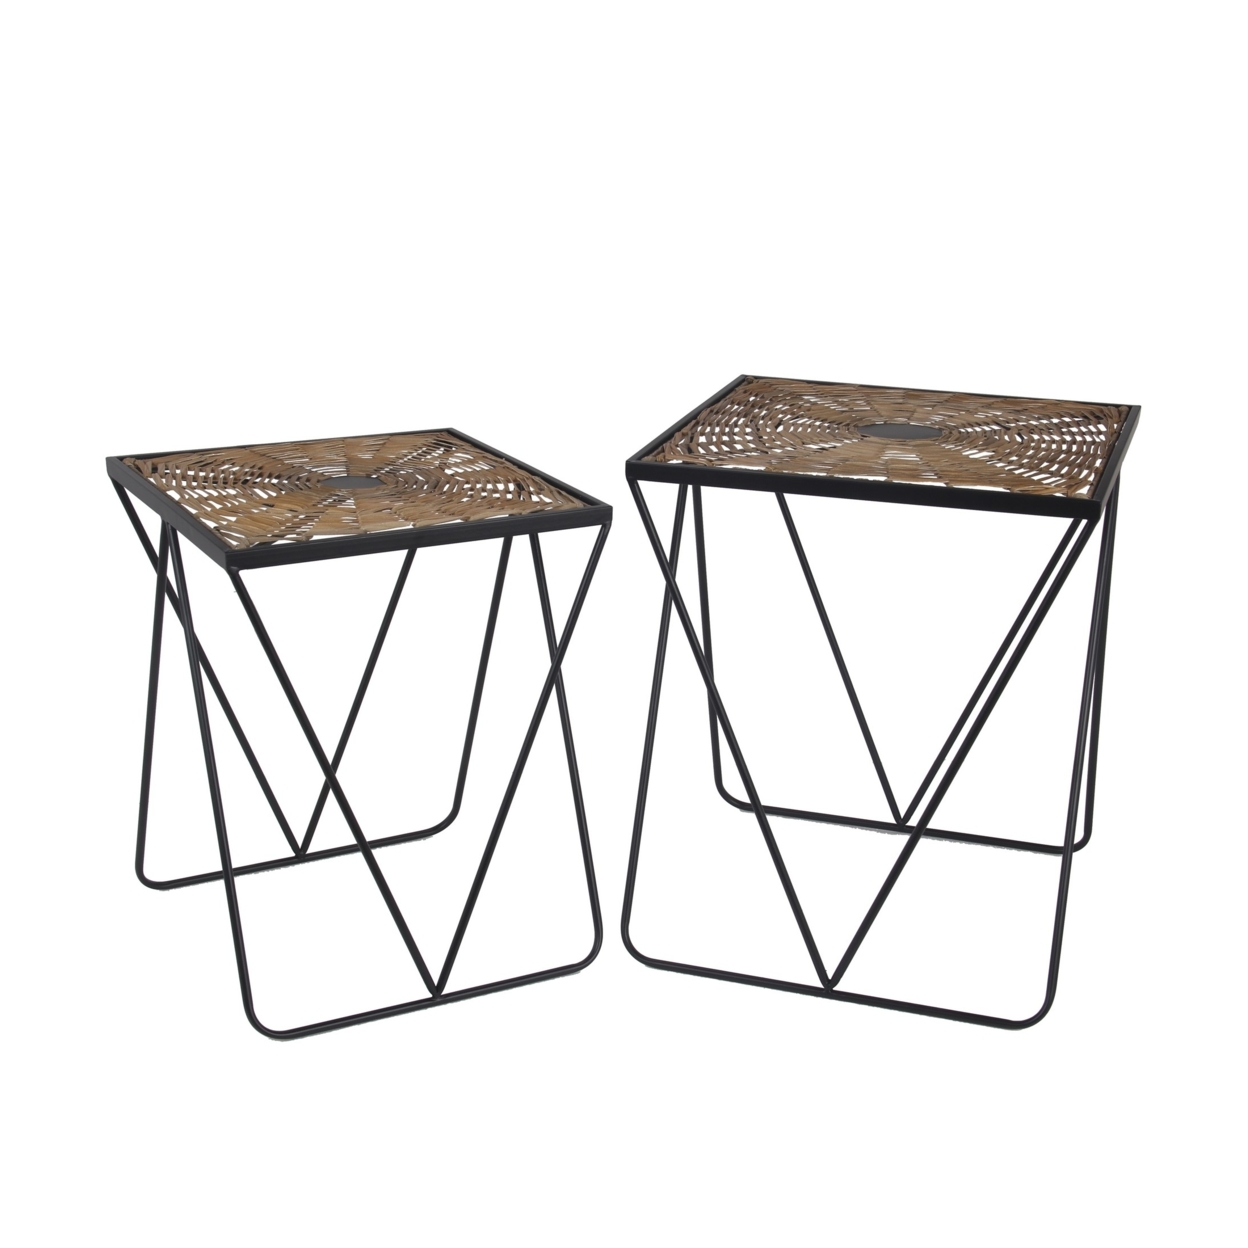 Woven Vinyl Top Square Accent Table,Set Of 2,Brown And Black- Saltoro Sherpi